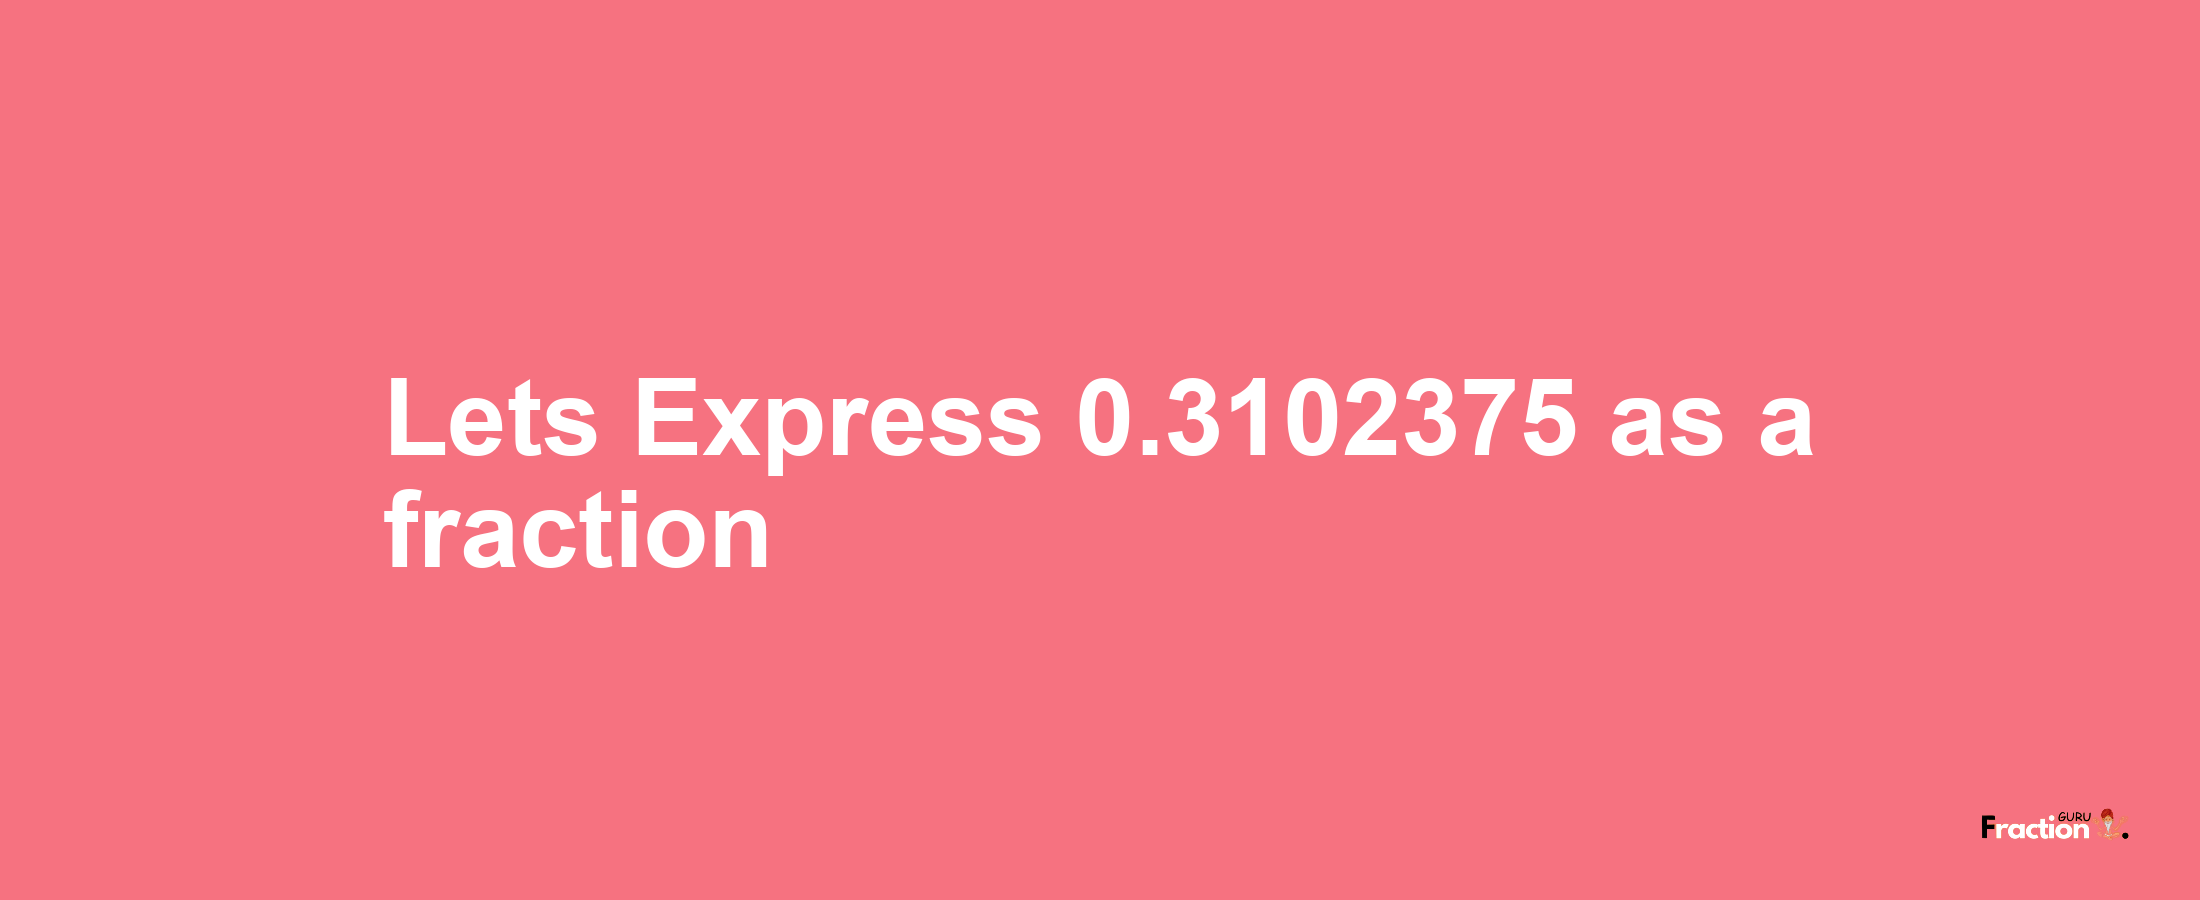 Lets Express 0.3102375 as afraction